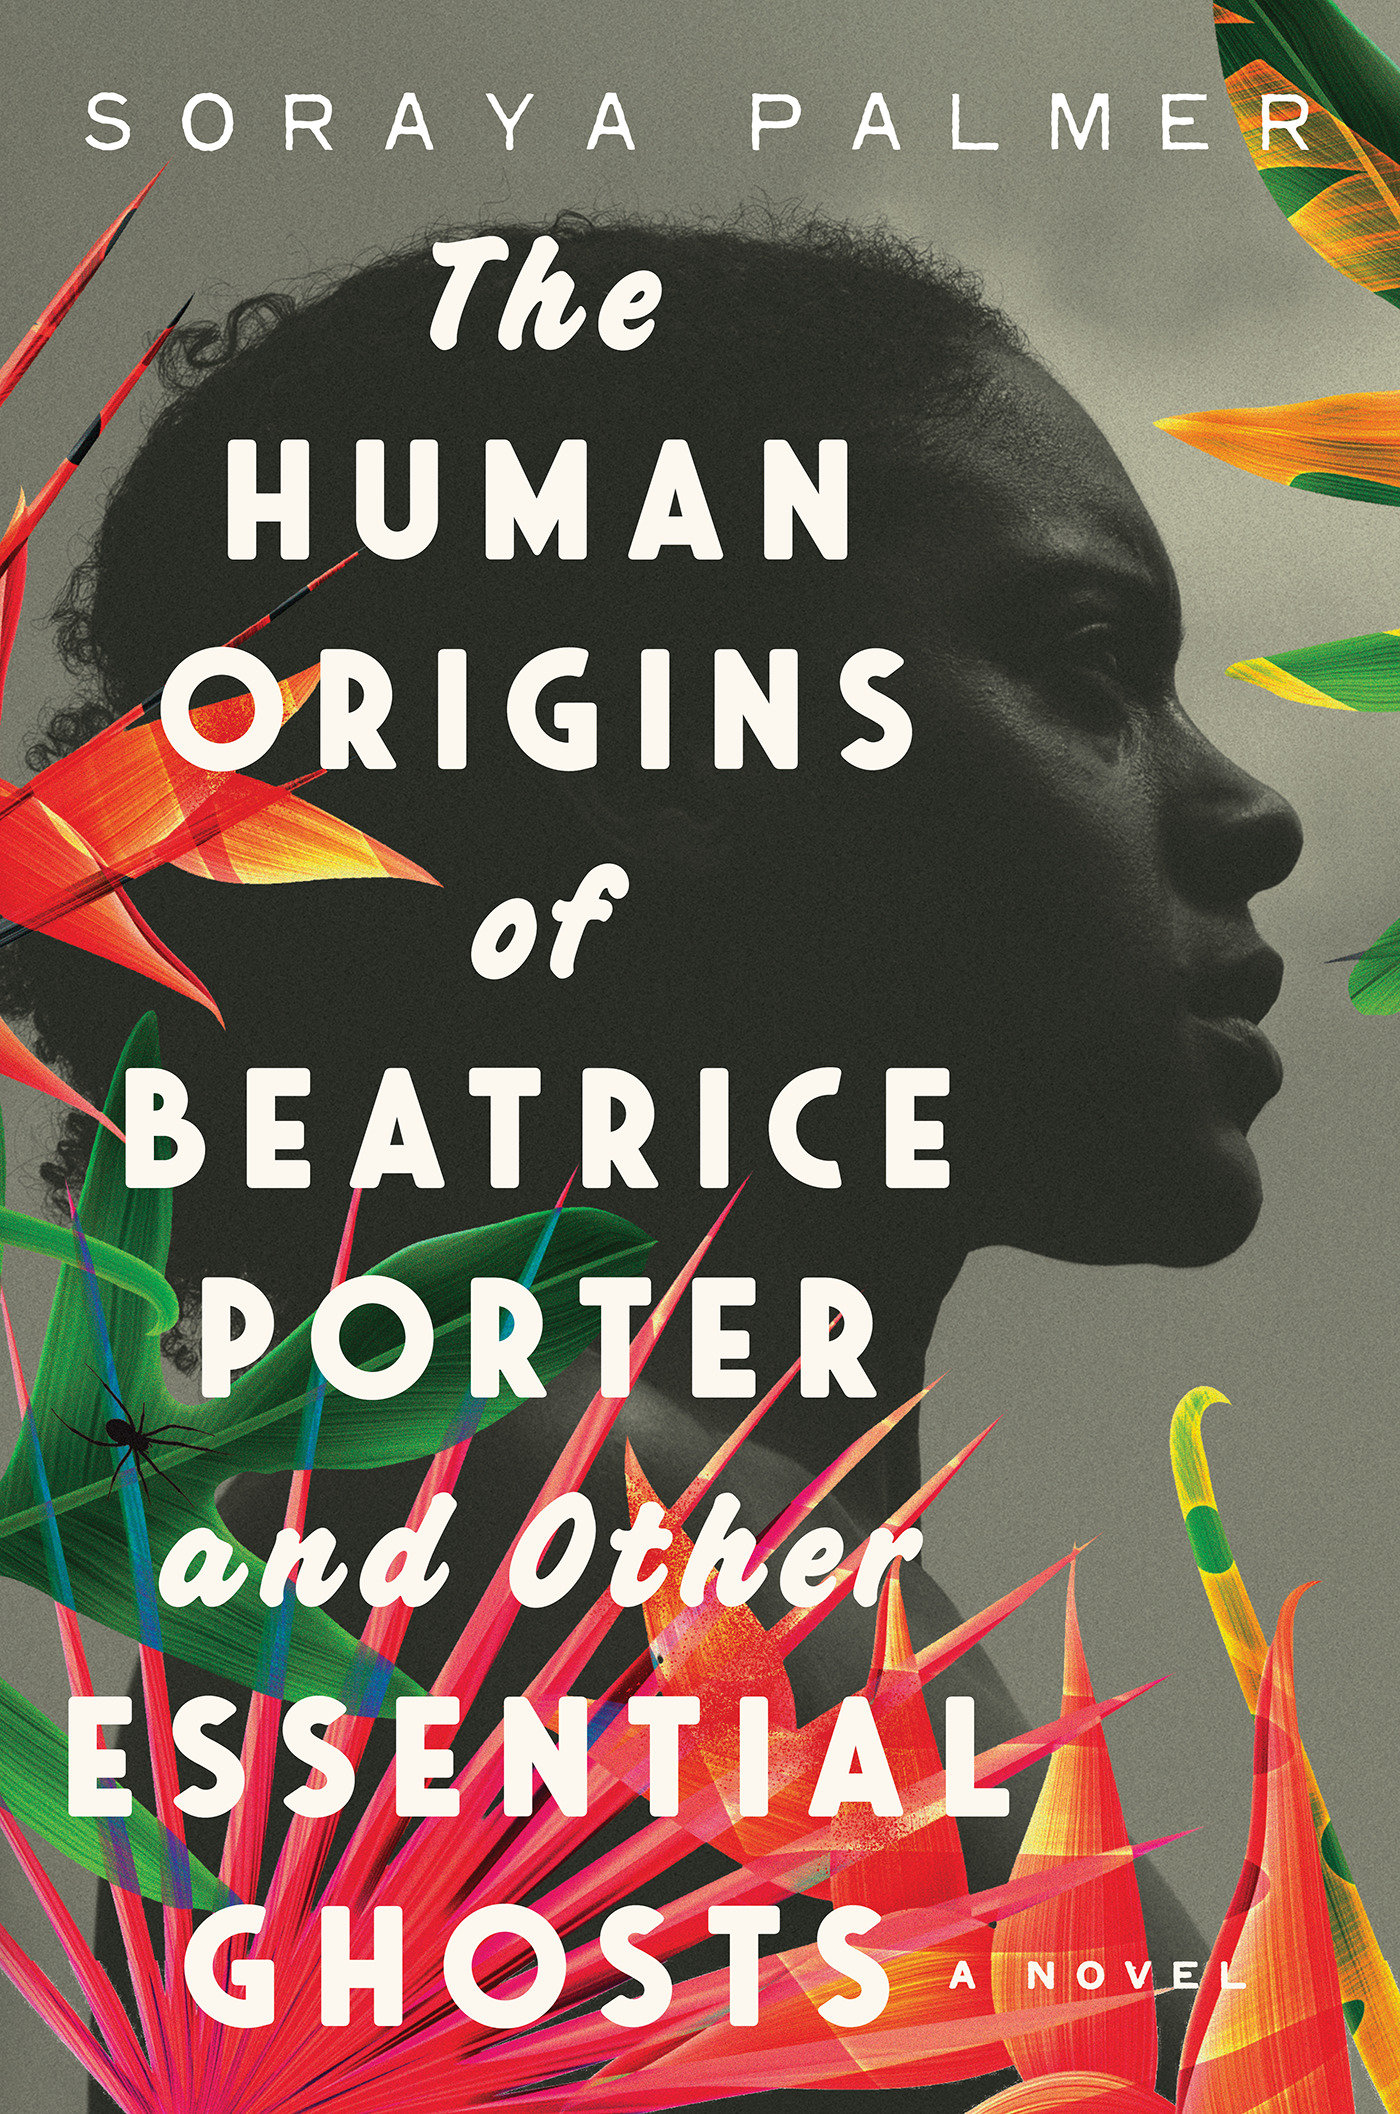 The Human Origins Of Beatrice Porter And Other Essential Ghosts (Hardcover Book)